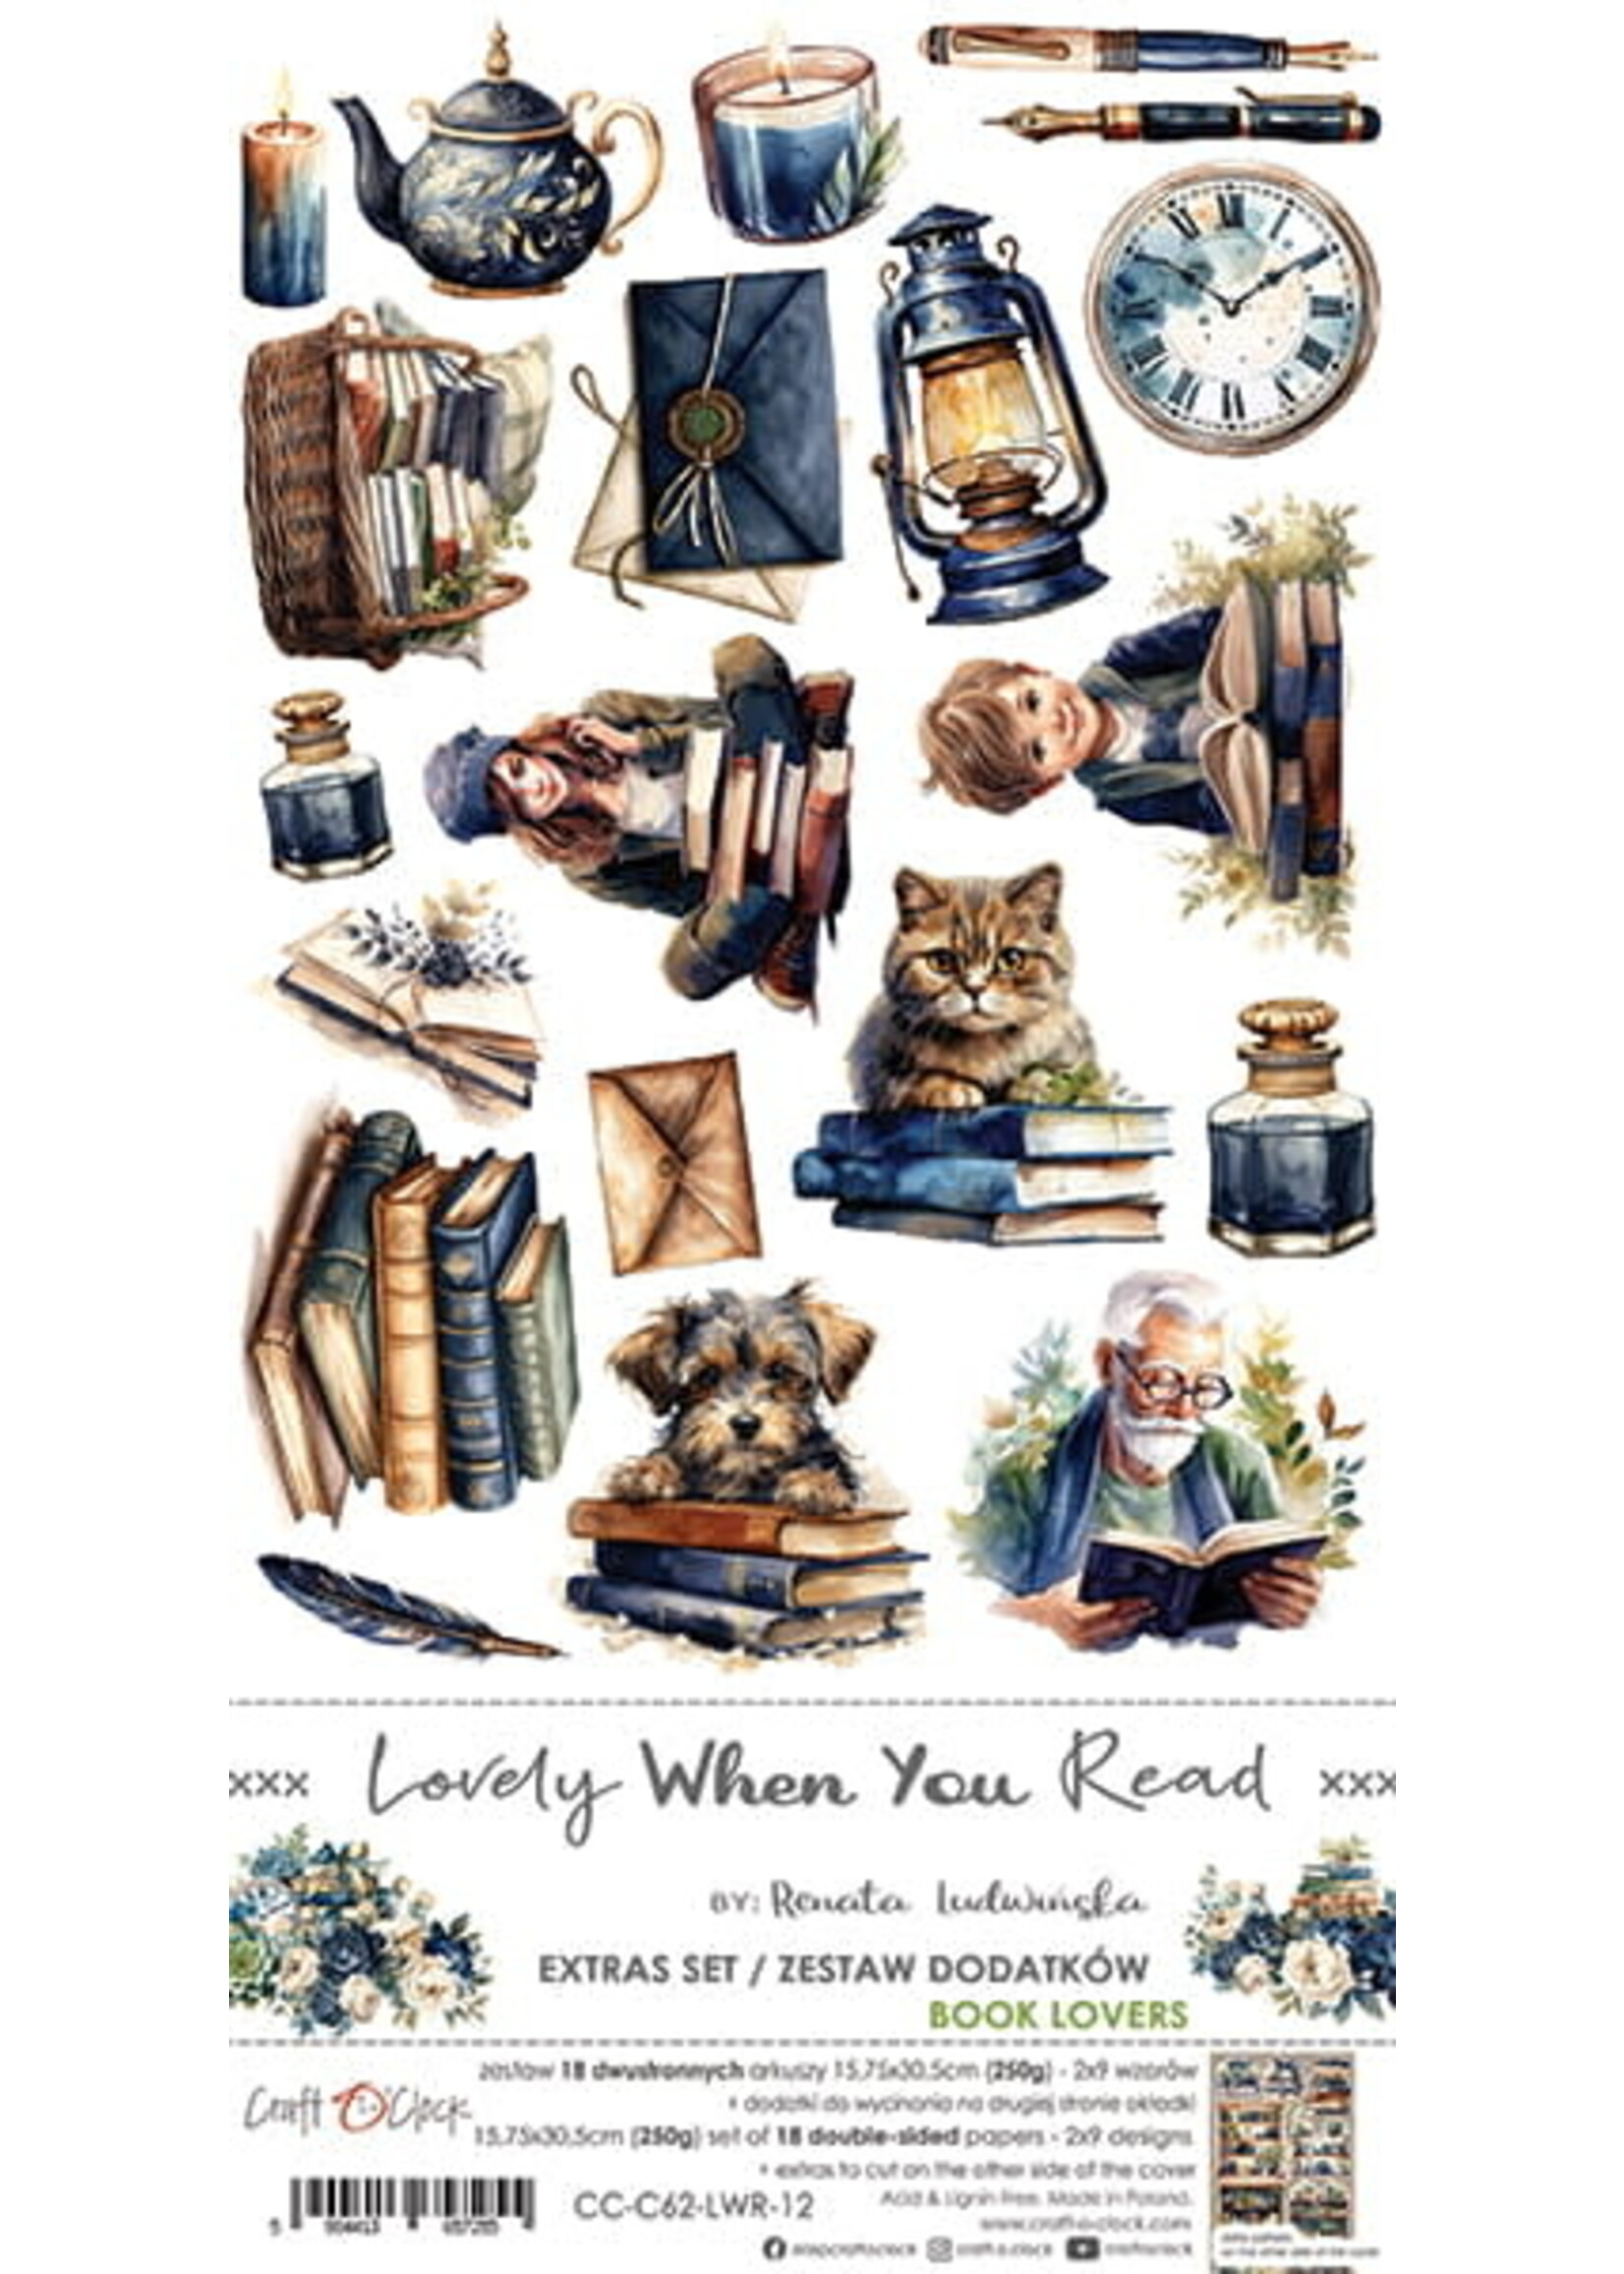 Craft O Clock LOVELY WHEN YOU READ - EXTRAS SET - BOOK LOVERS